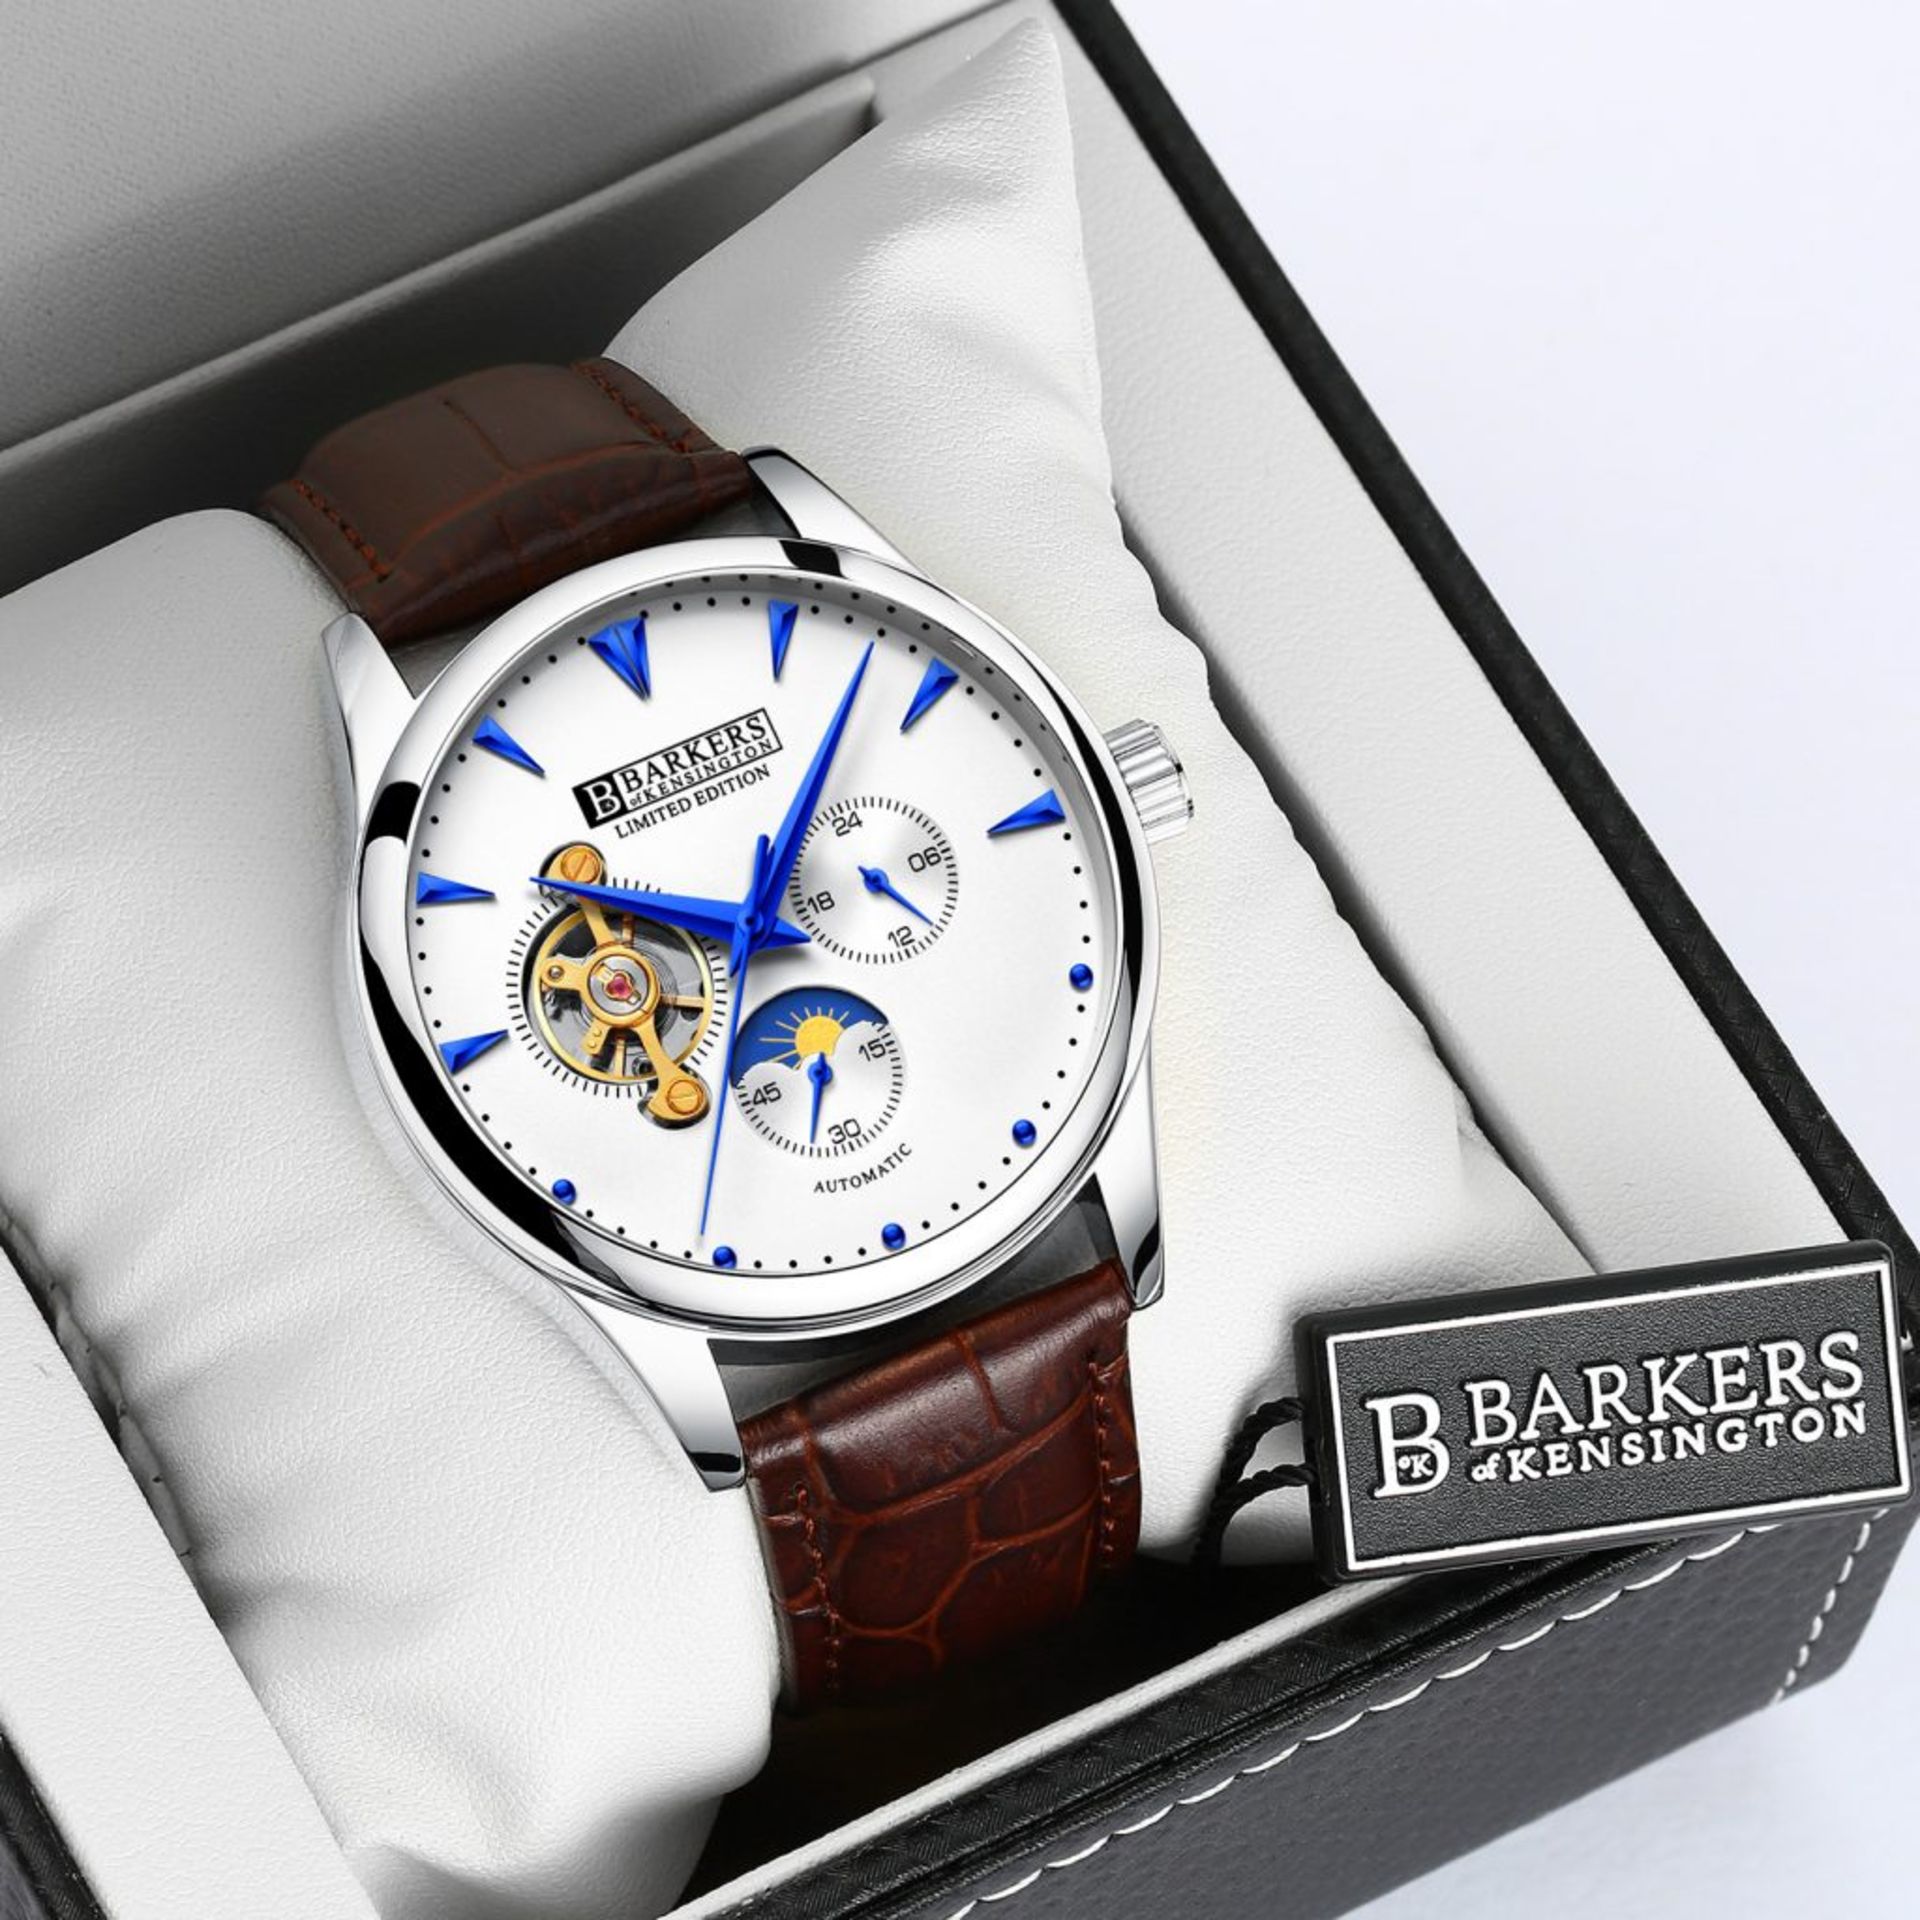 V *TRADE QTY* Brand New Barkers Of Kensington Gents Limited Edition Automatic Watch with Blue - Image 2 of 3